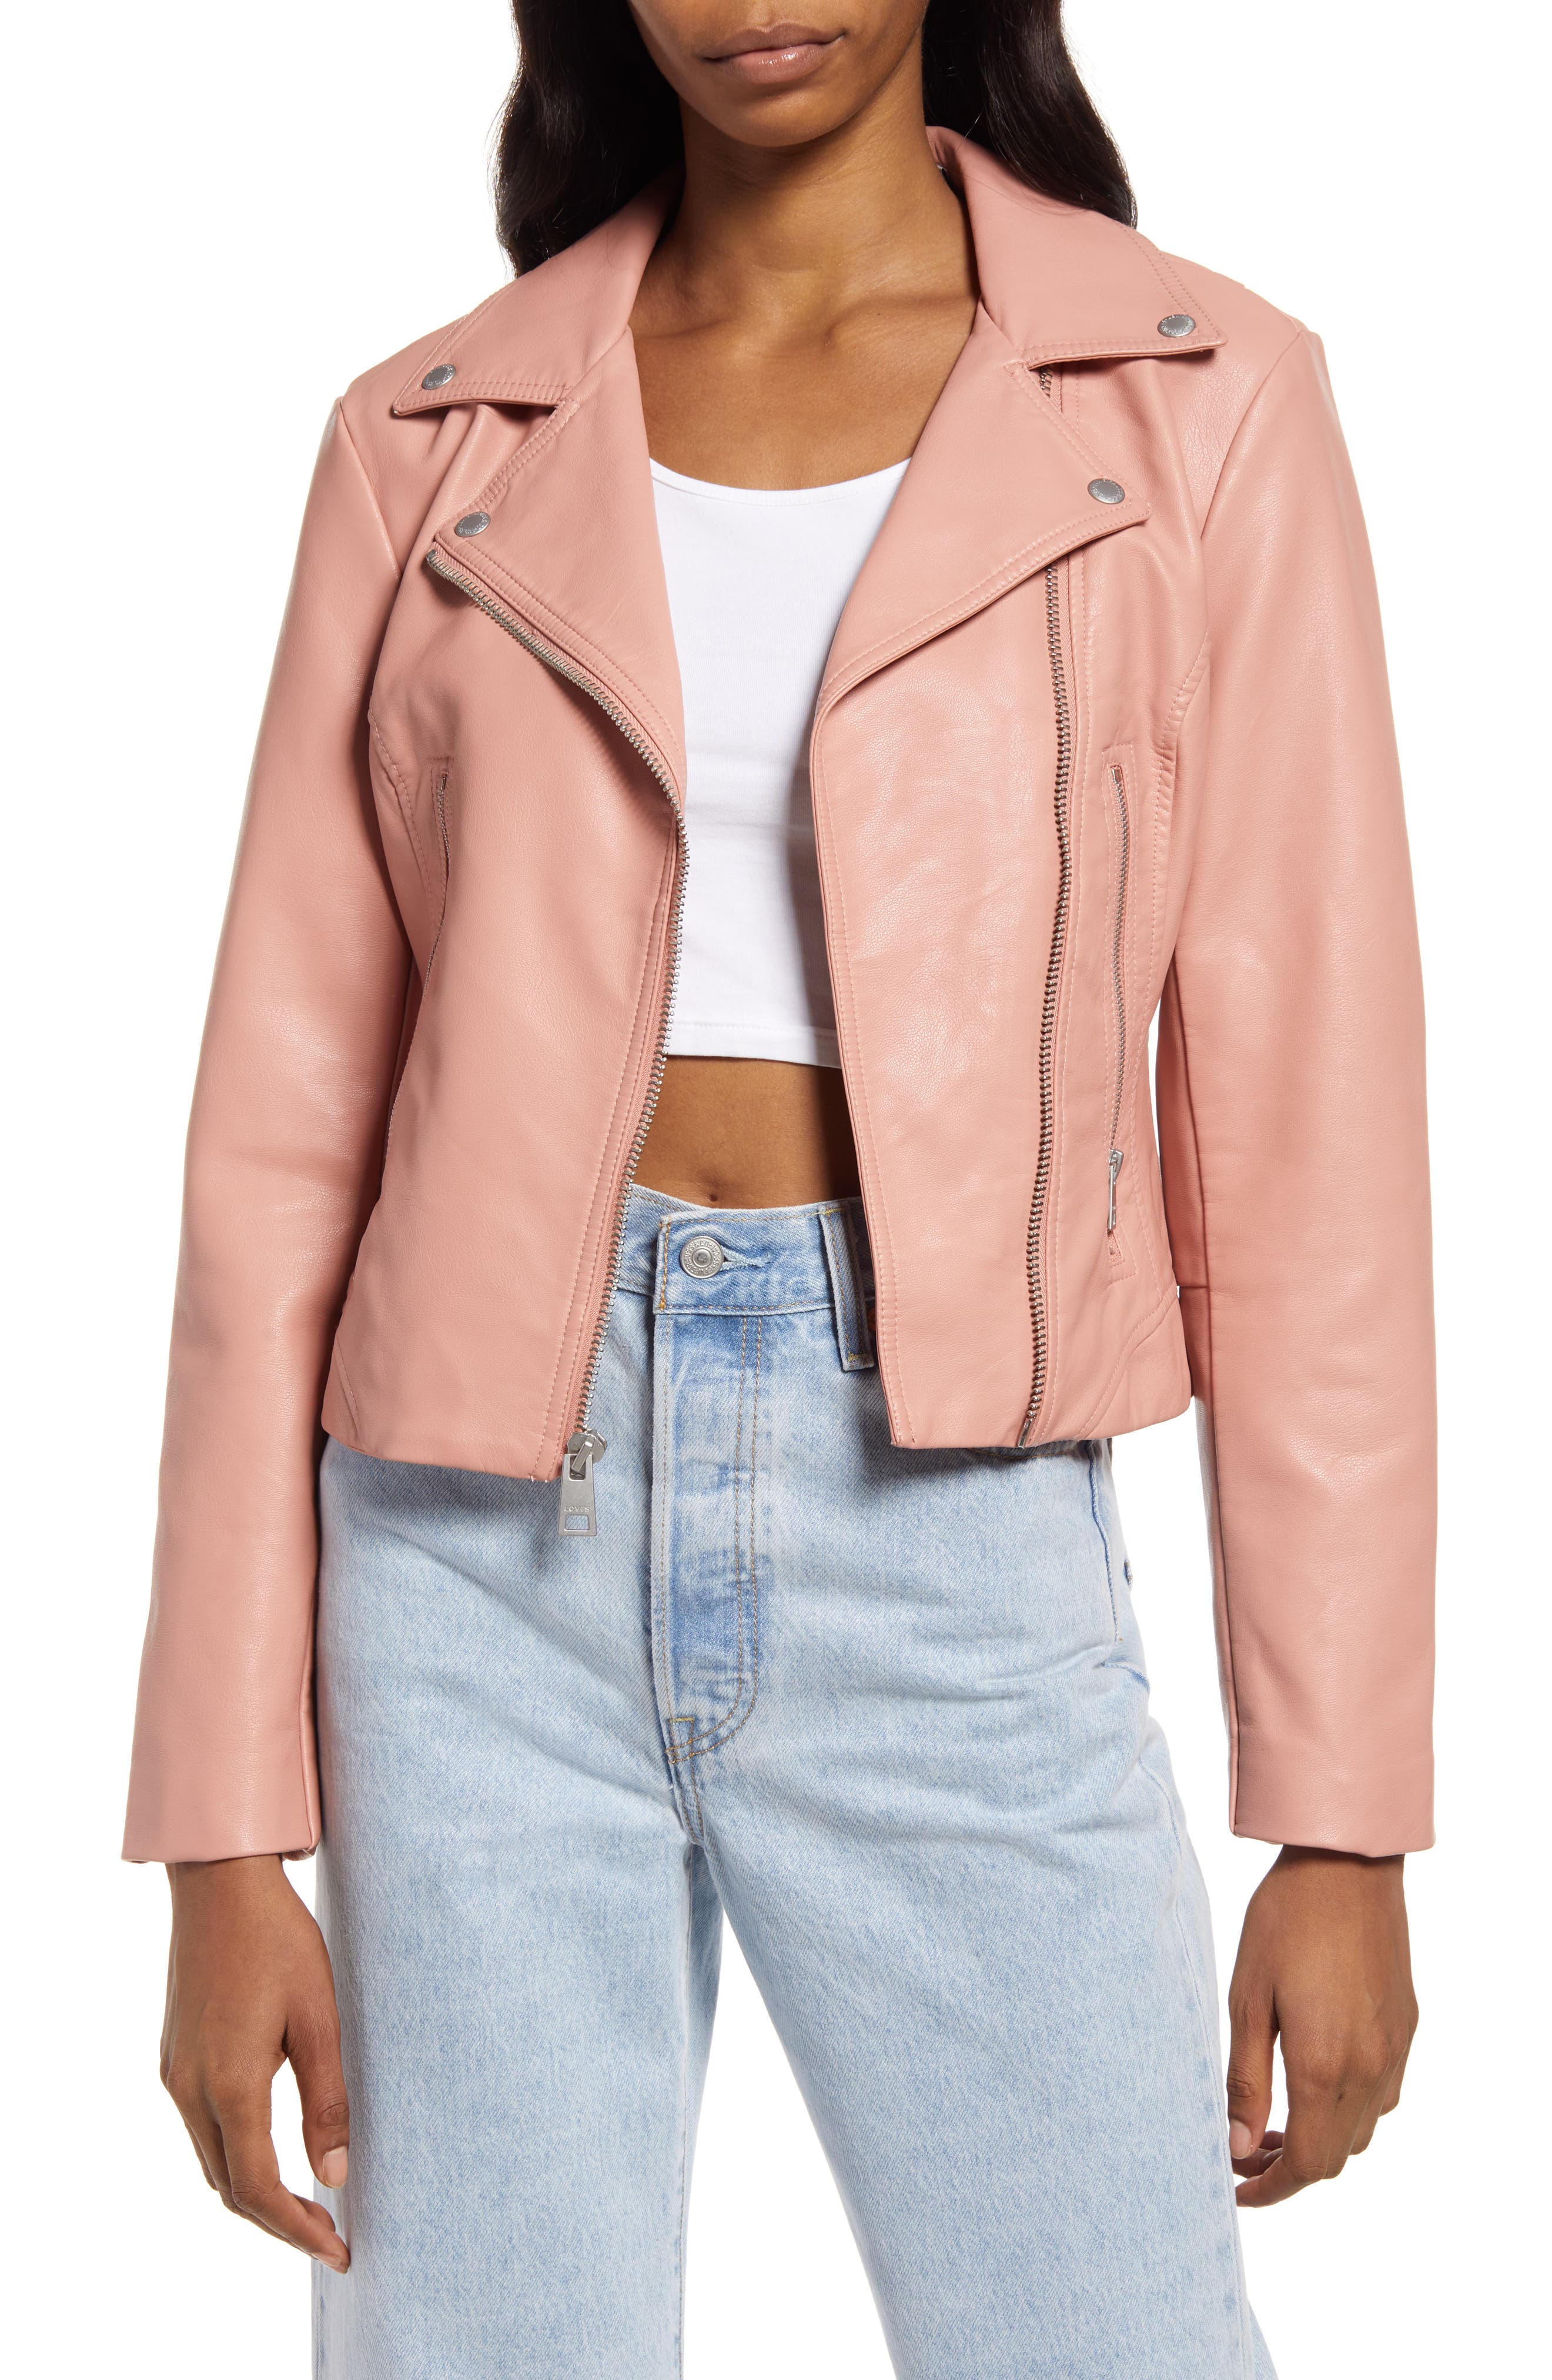 DROMe Leather Jacket in Pastel Pink Pink Womens Clothing Jackets Leather jackets 